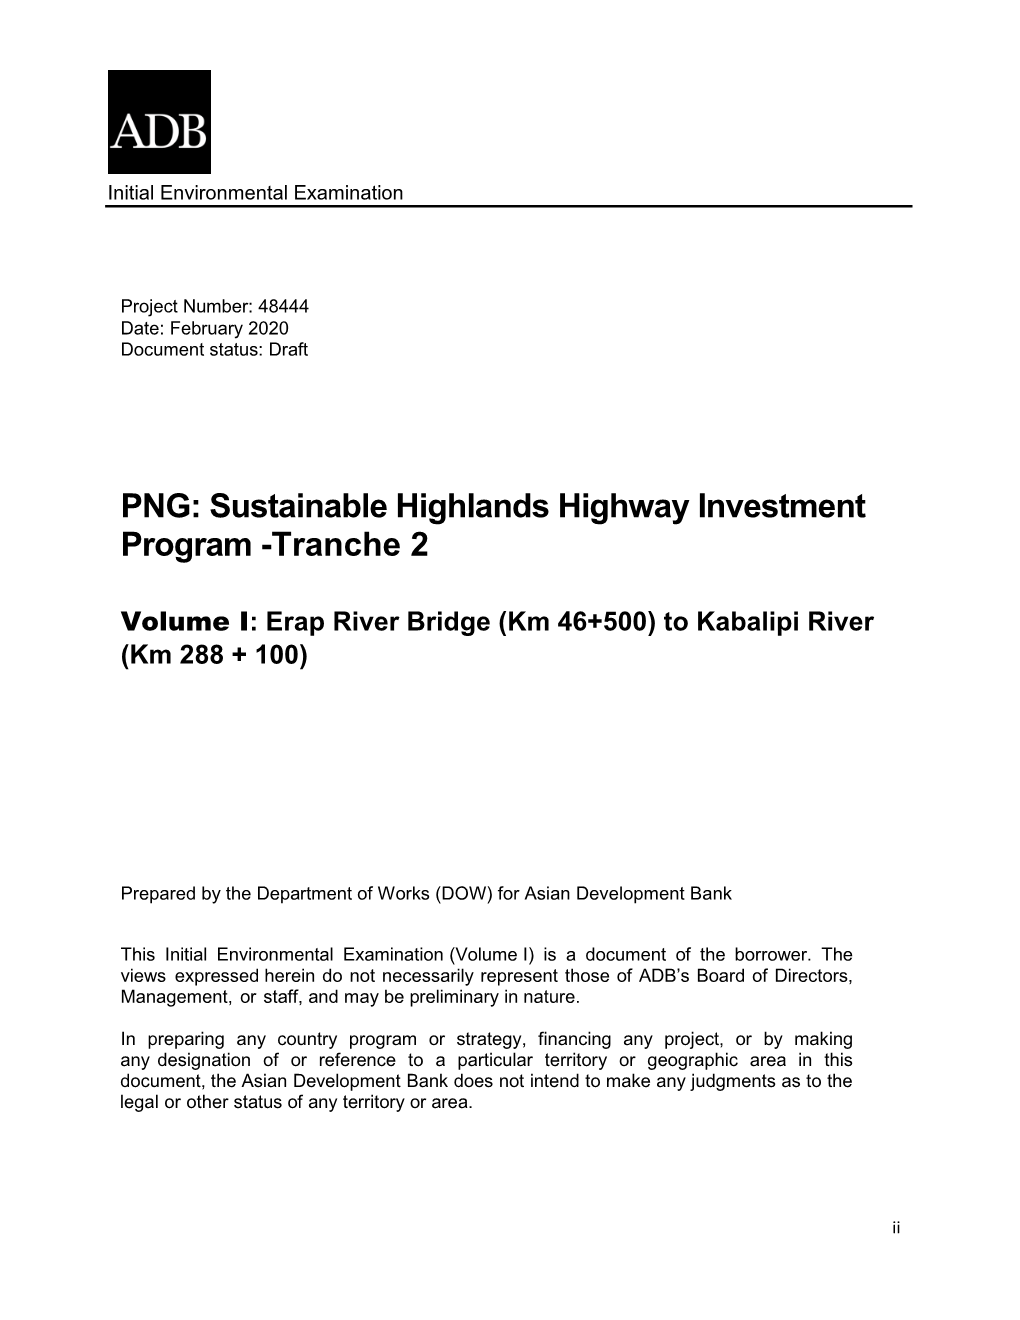 PNG: Sustainable Highlands Highway Investment Program -Tranche 2